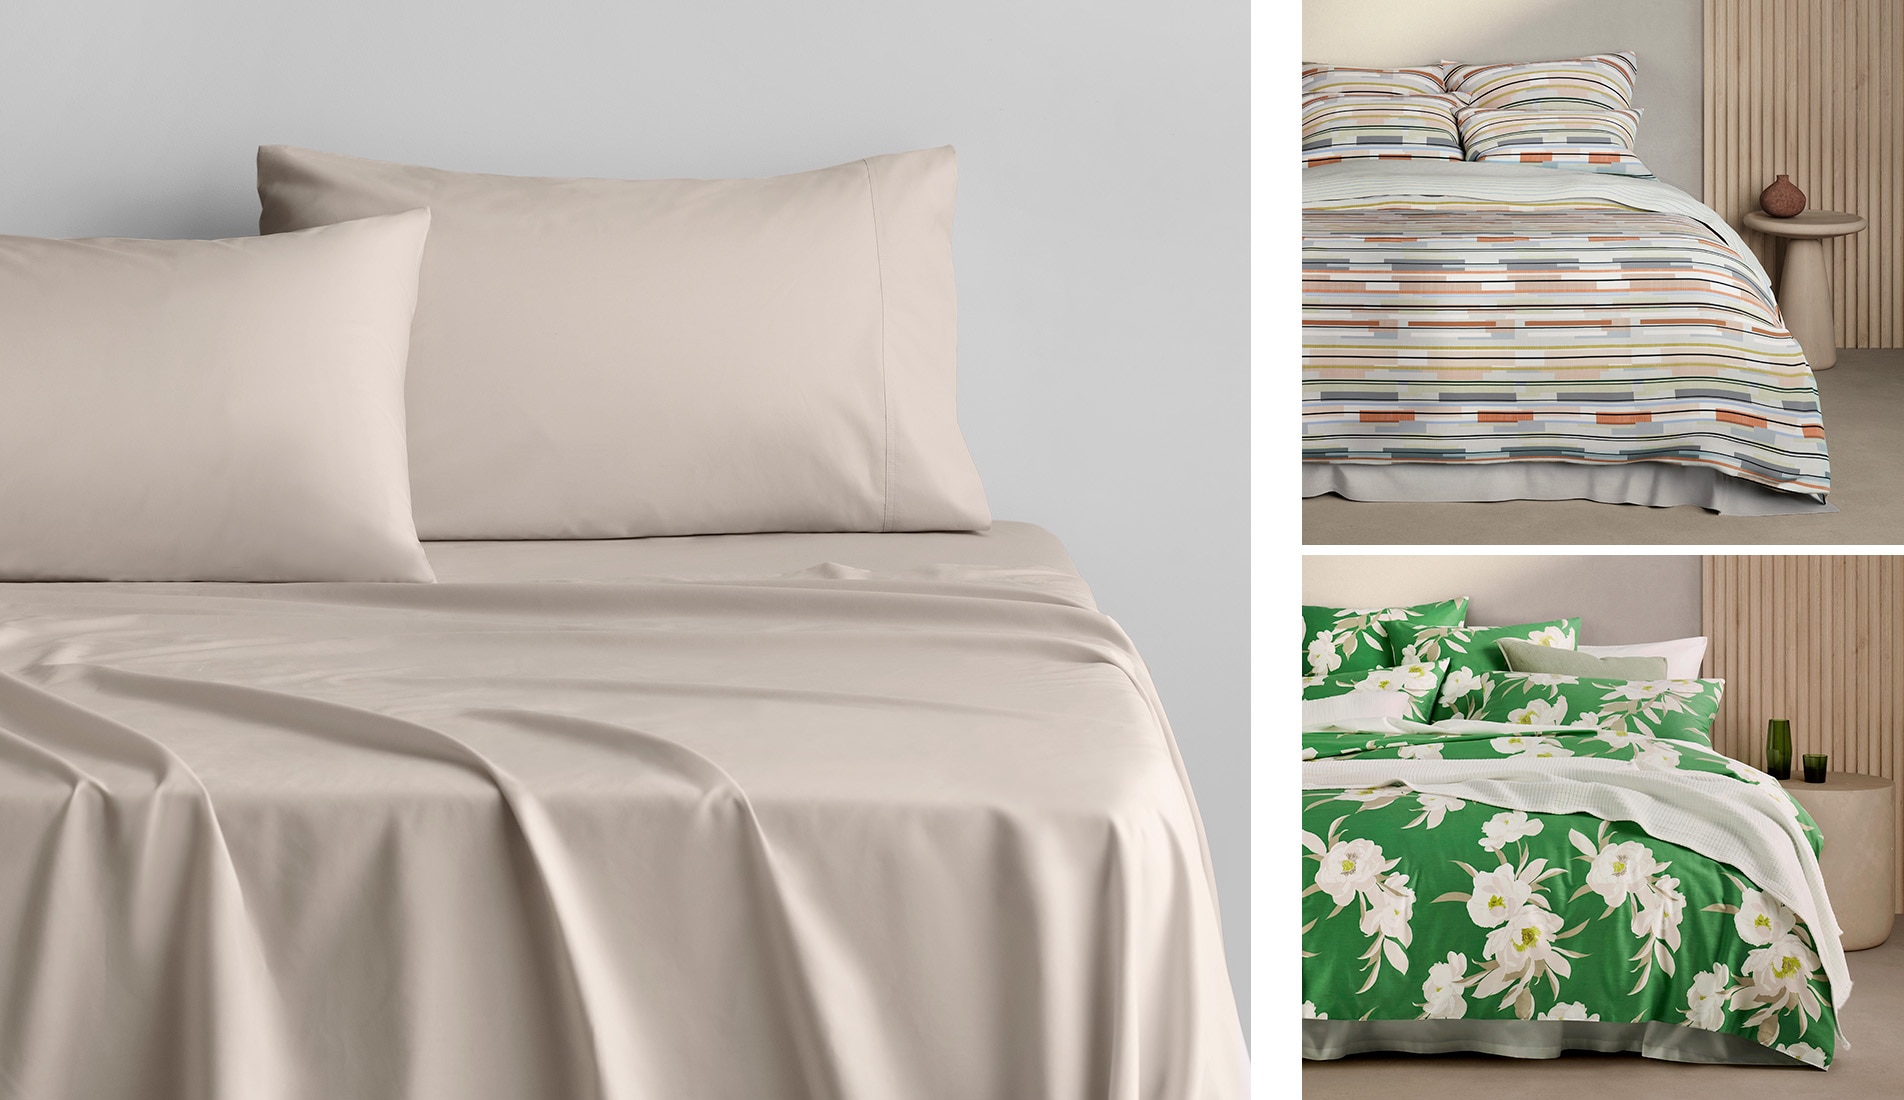 split image. left hand side has byren percale tencel lyocell sheet in warm sand. right hand side split into two. top image bed with broken stripe pattern, bottom image bed with green background and cream peony pattern